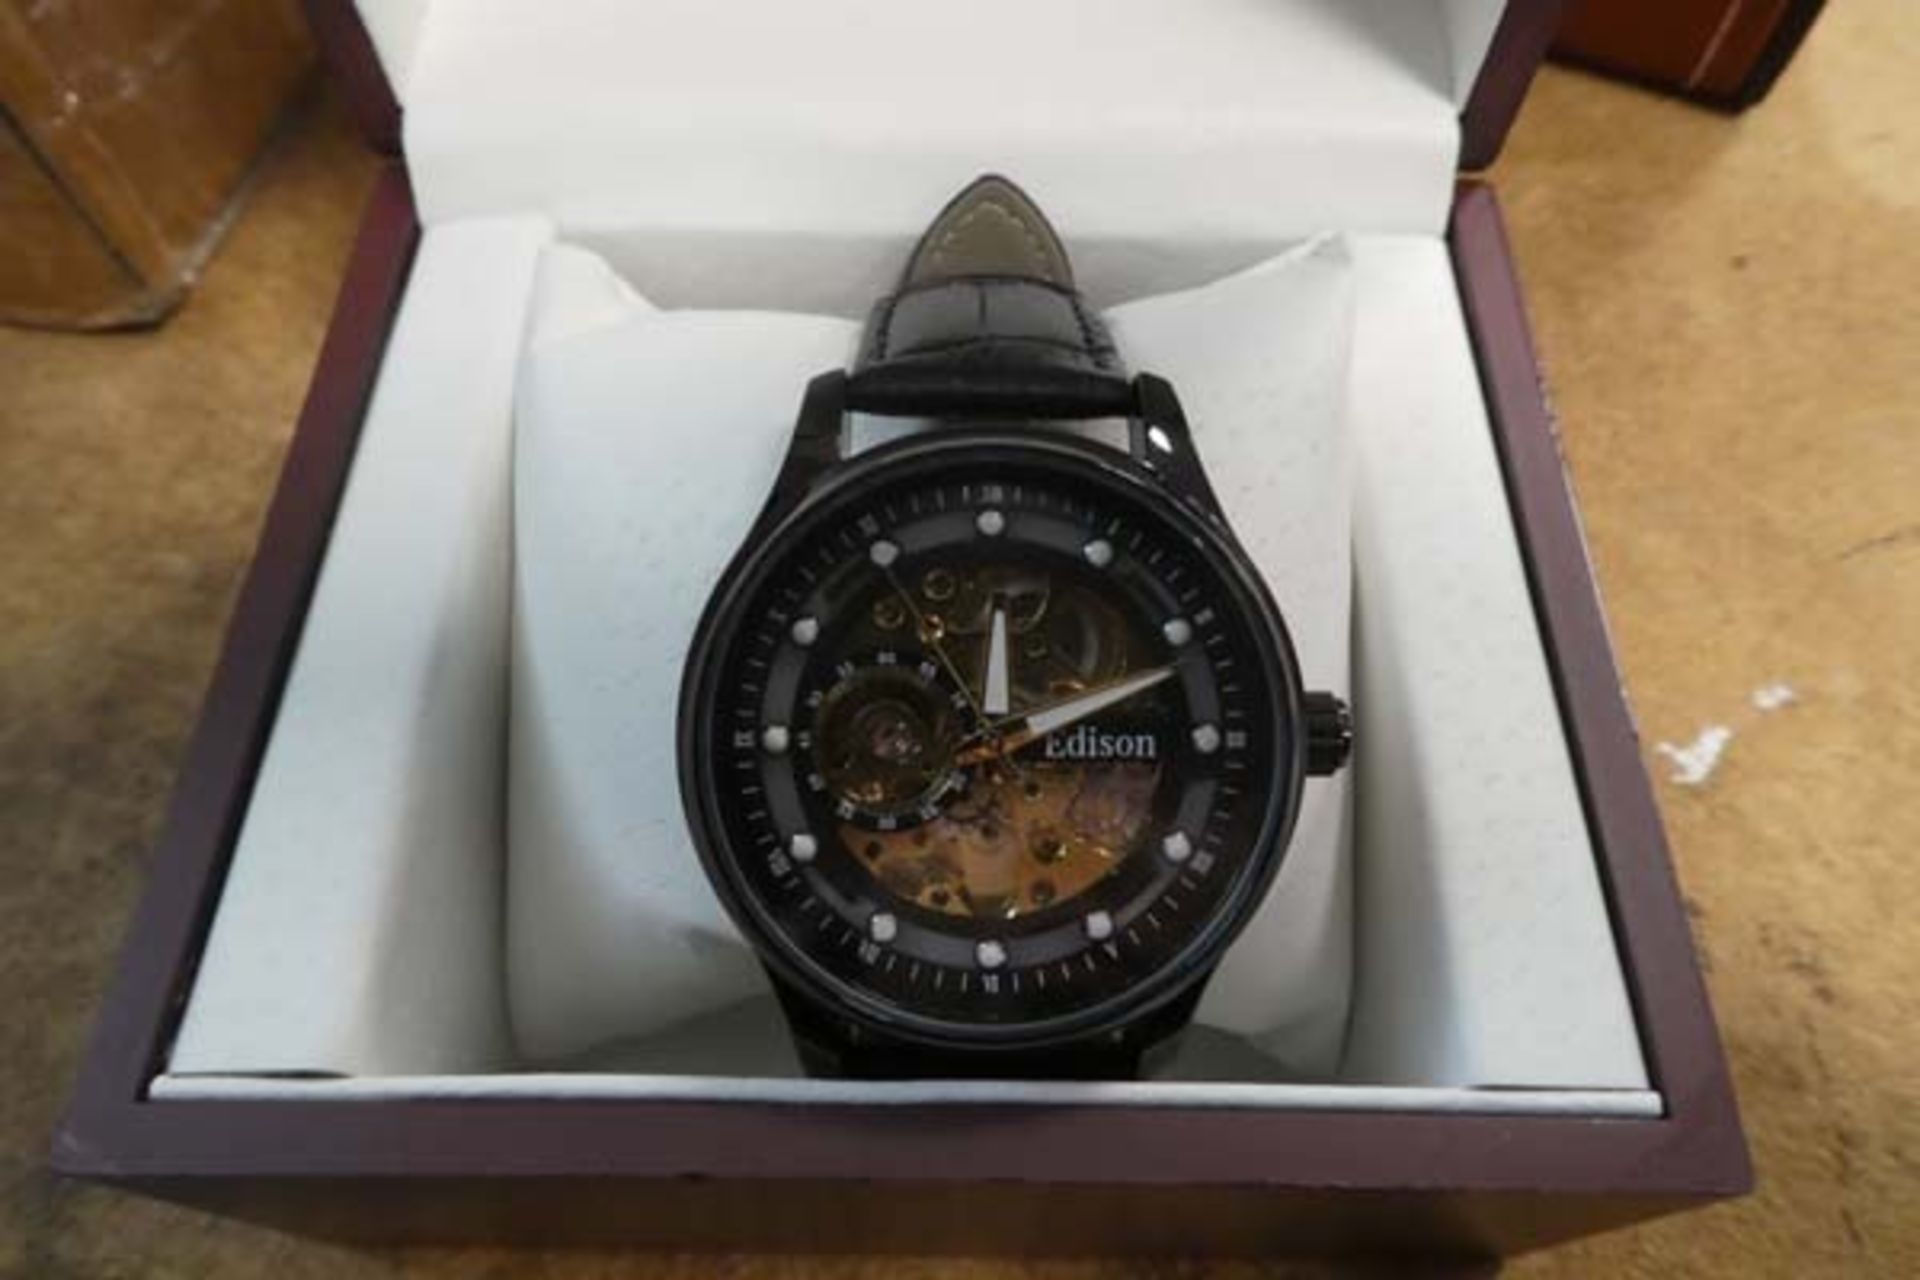 Edison moon phase dial automatic wristwatch with 2 tone strap and box